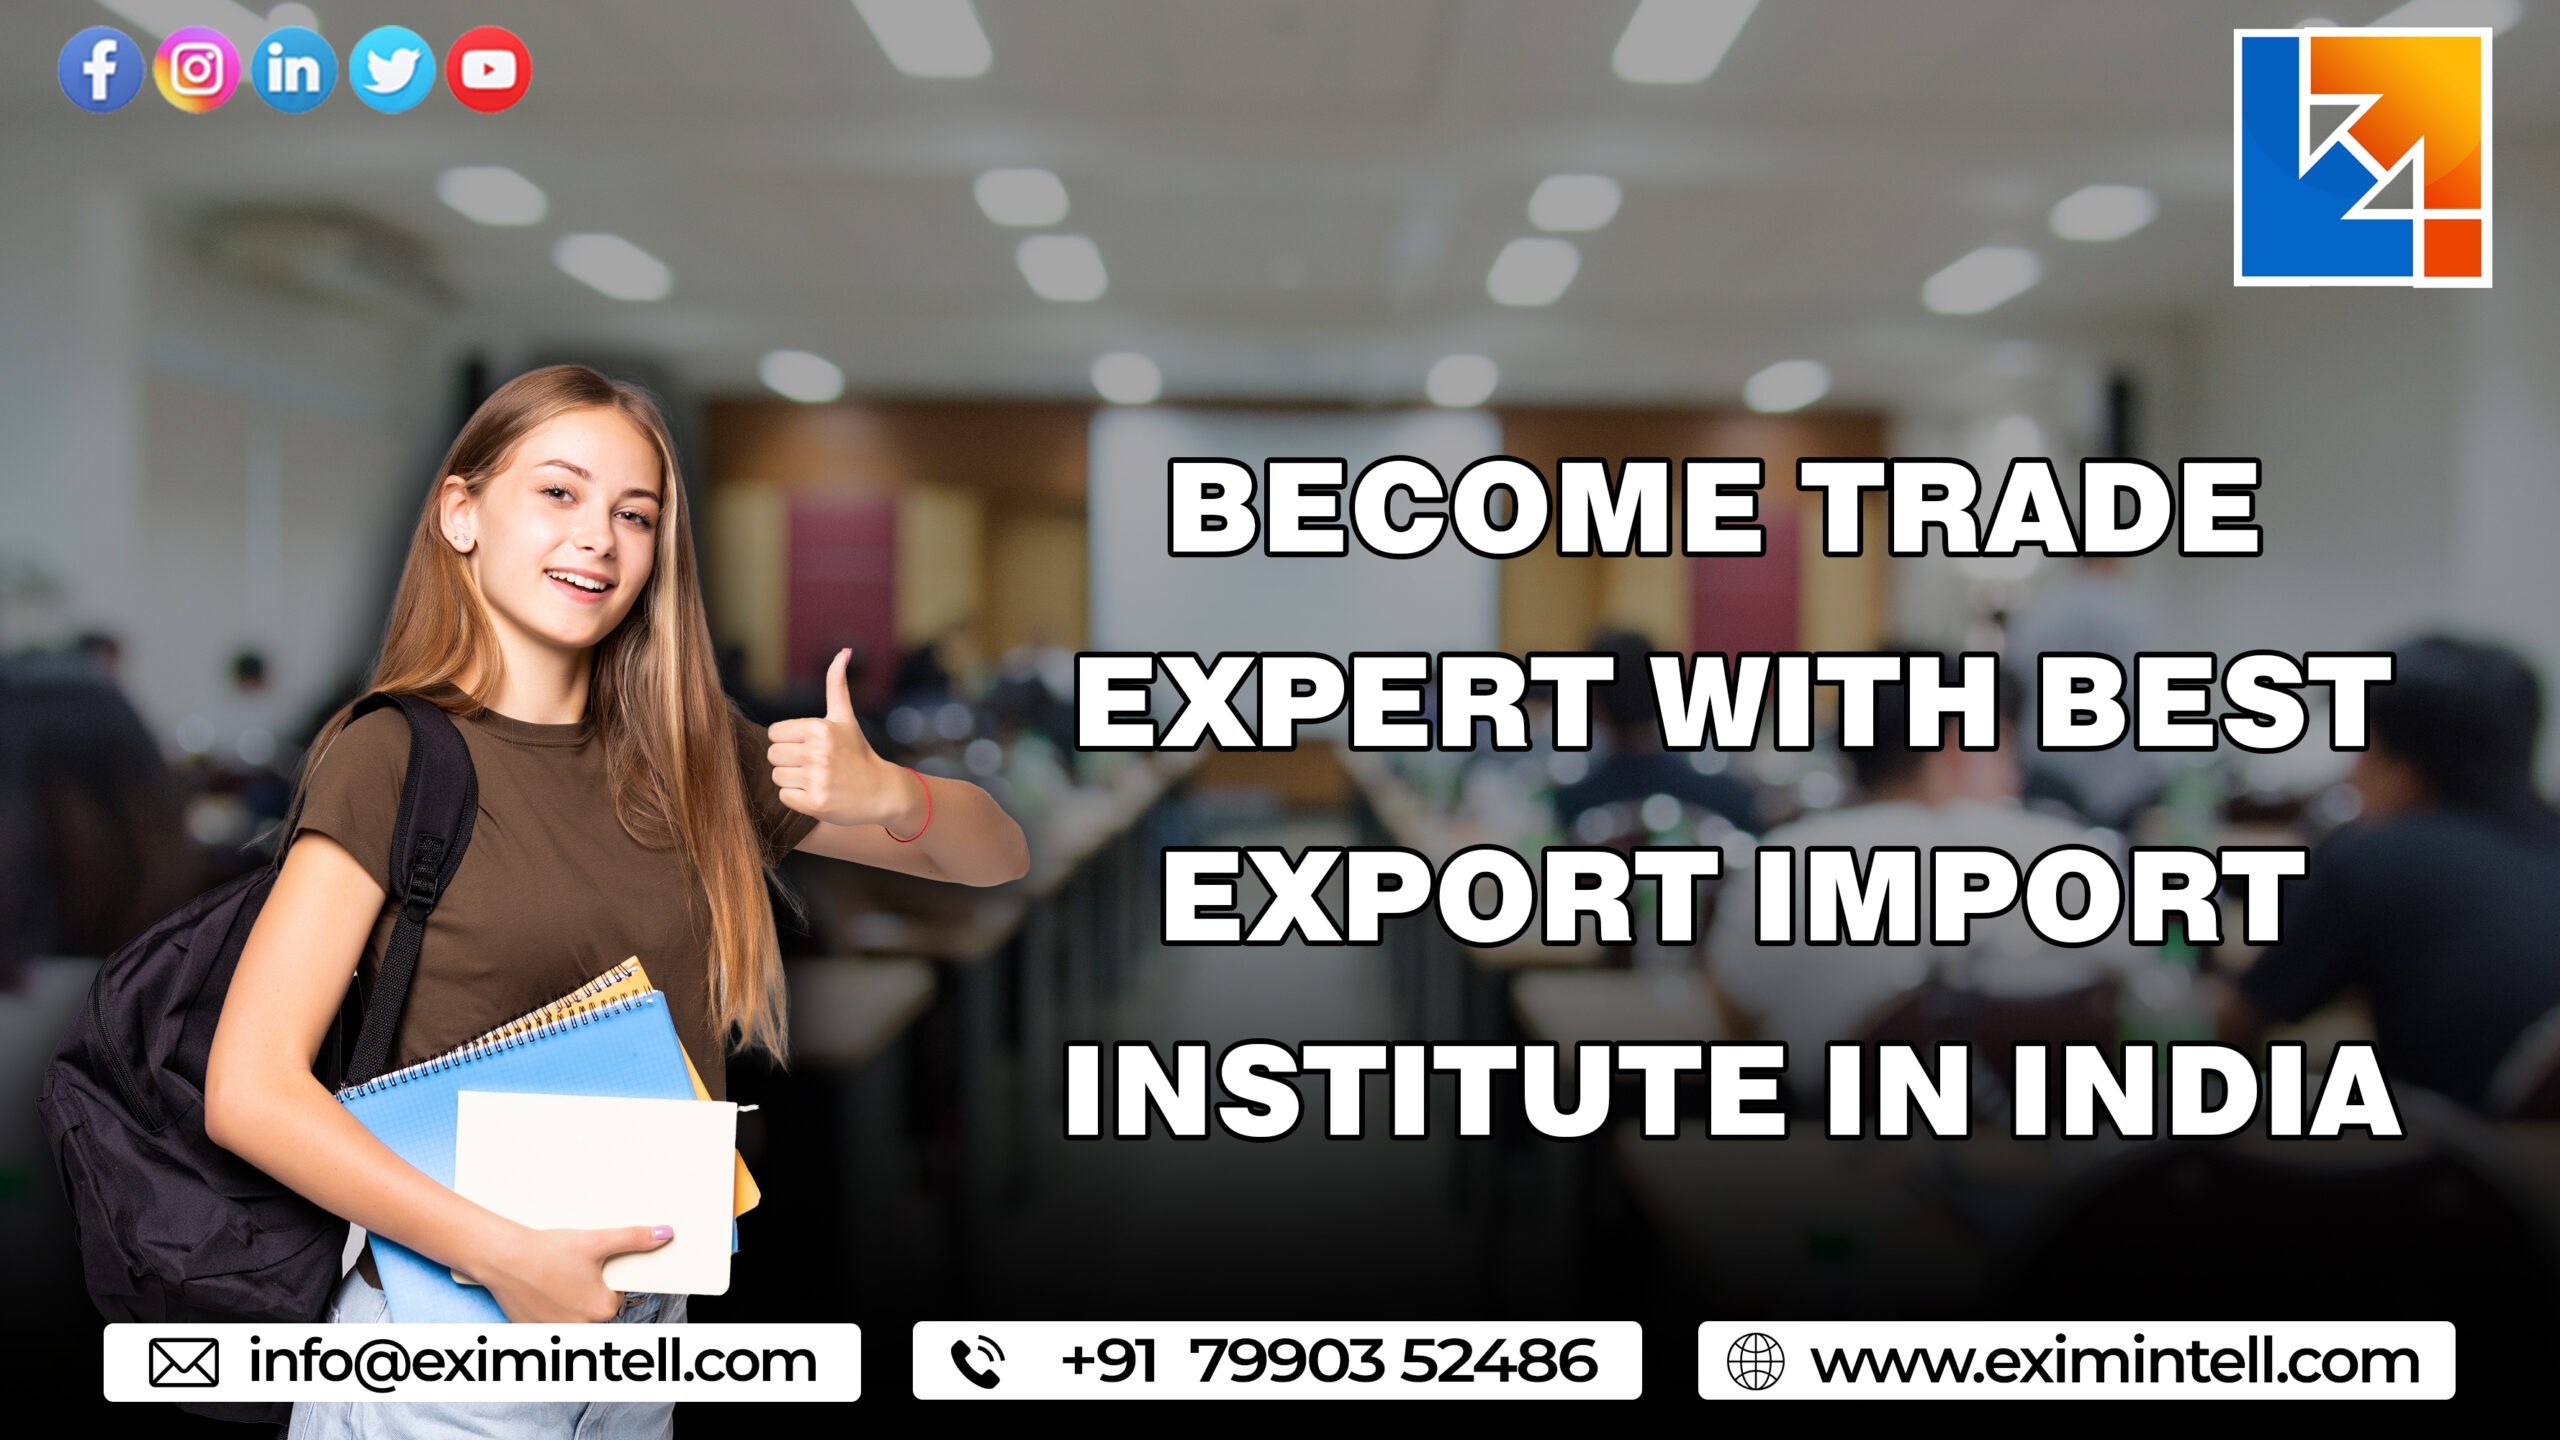 Become Trade Expert with Best Export Import Institute in India